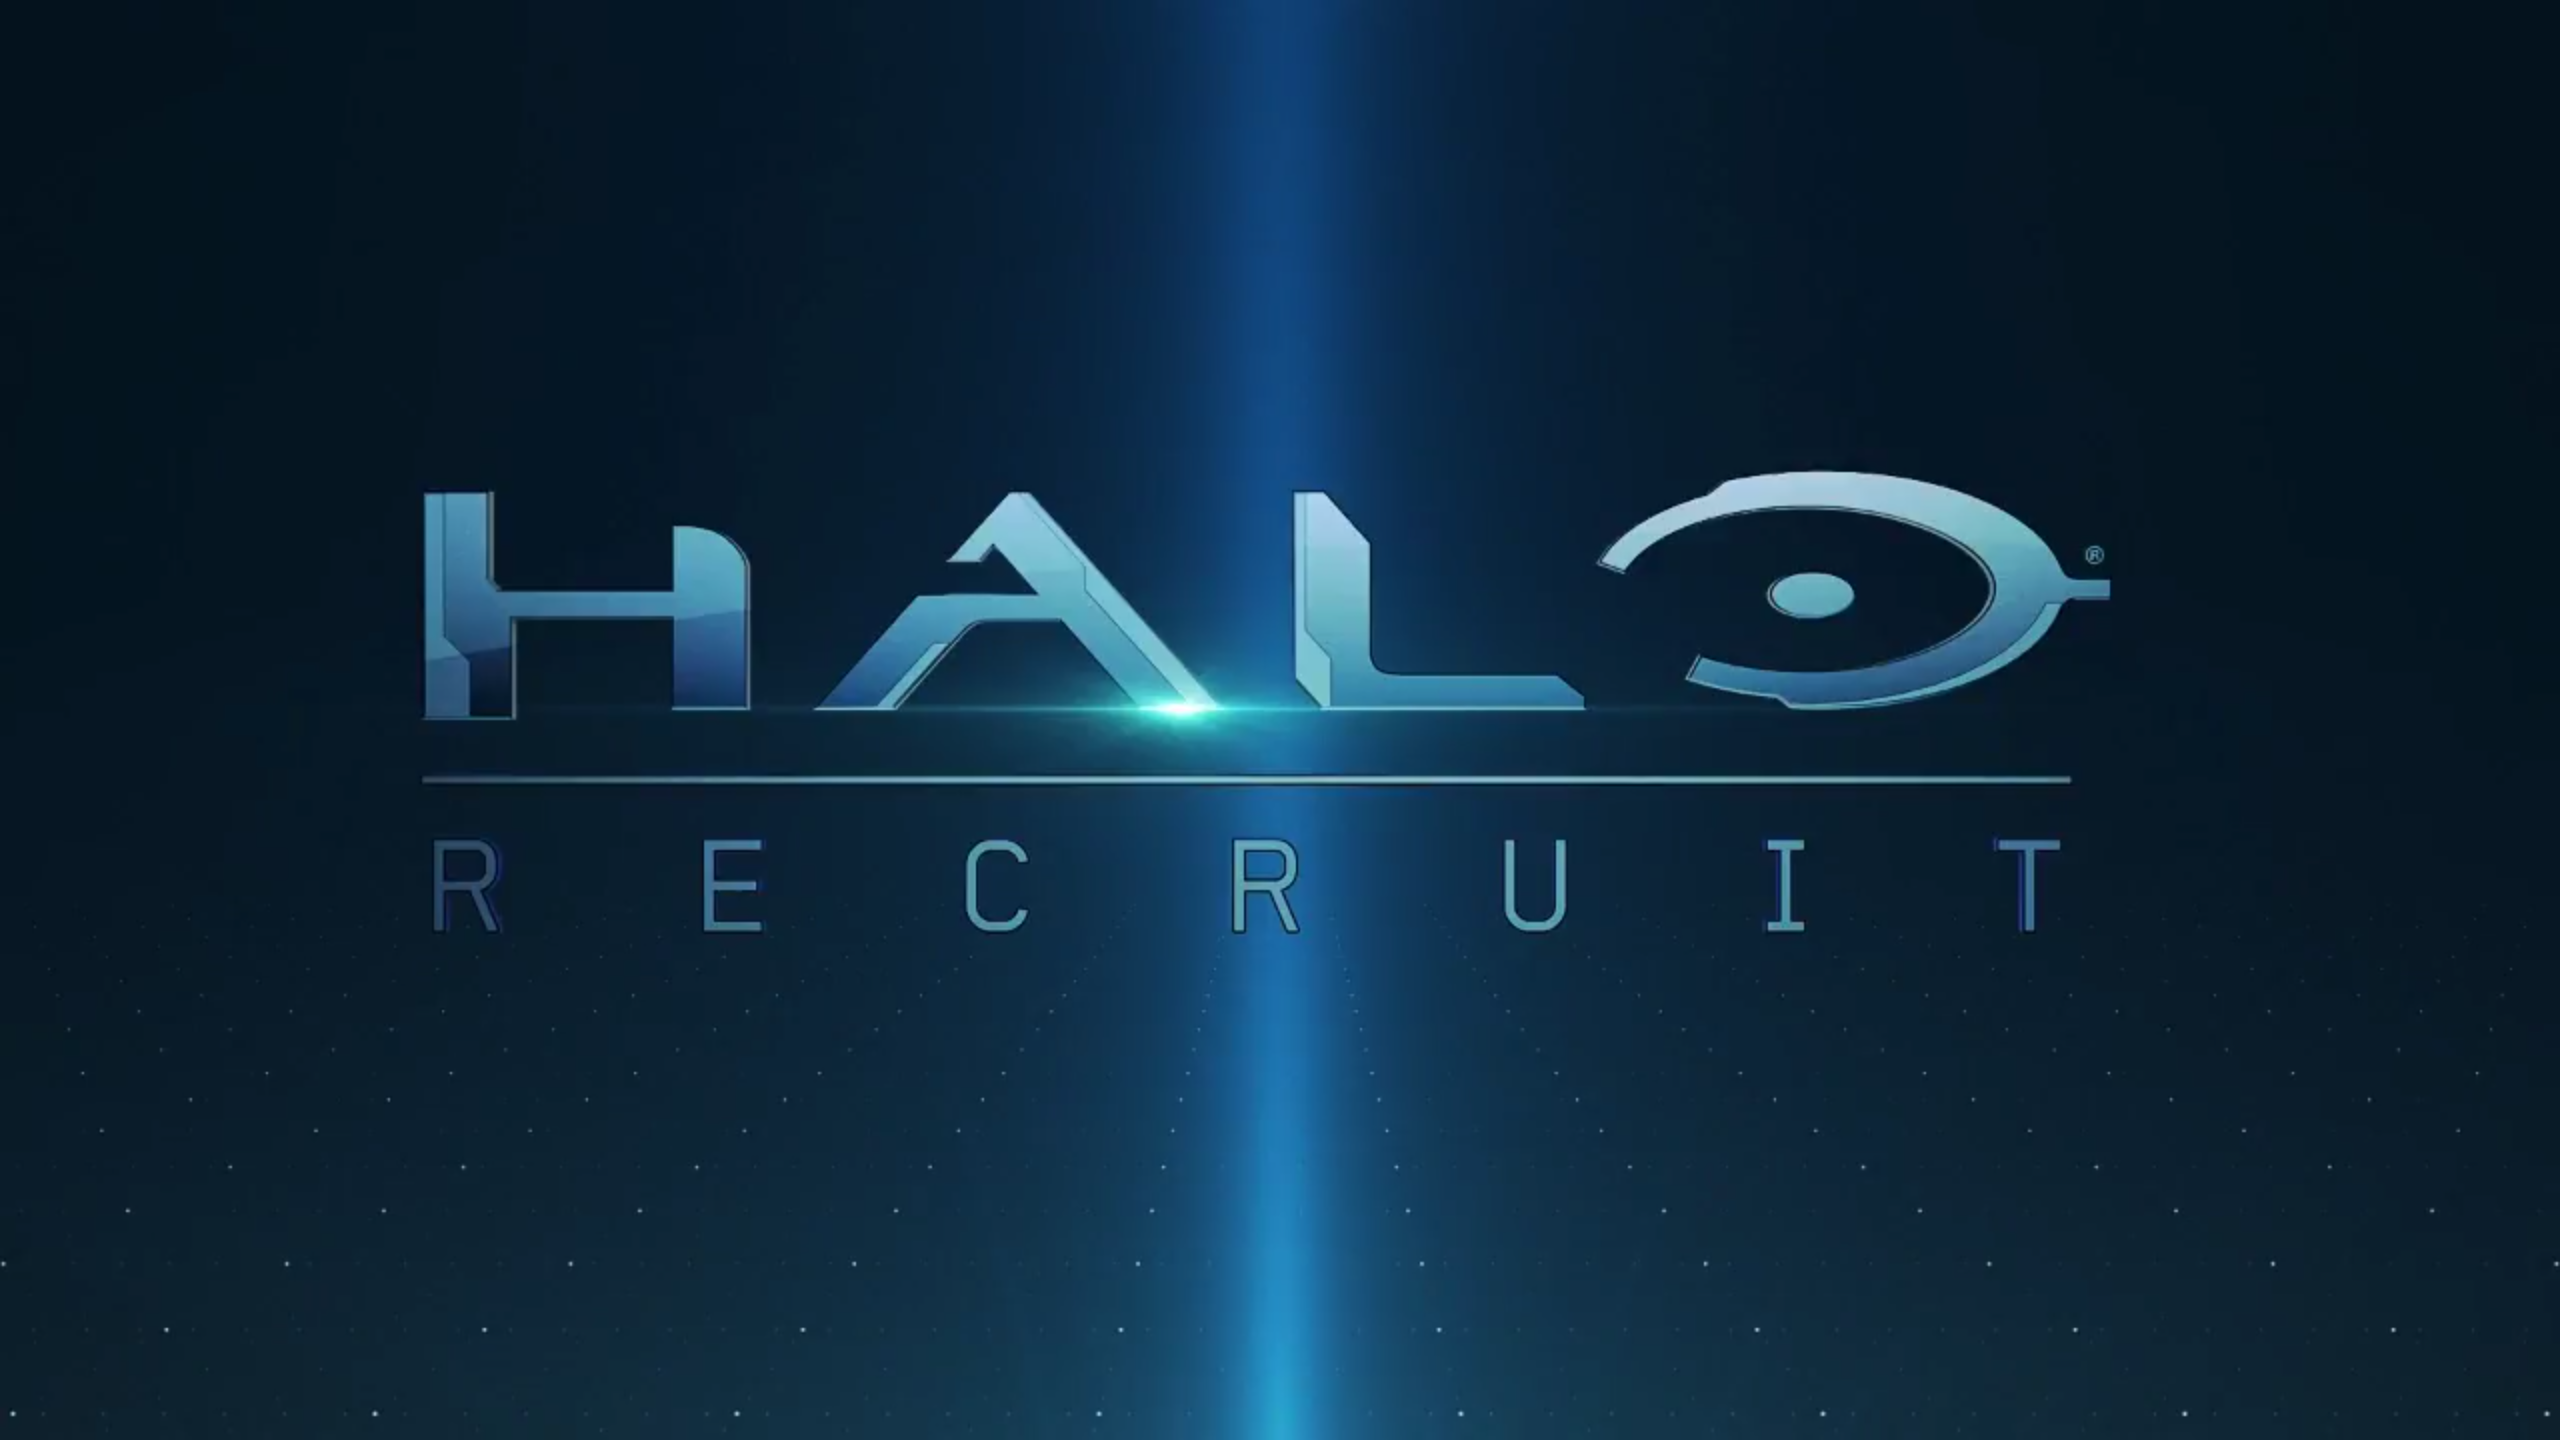 free Halo Recruit for iphone instal